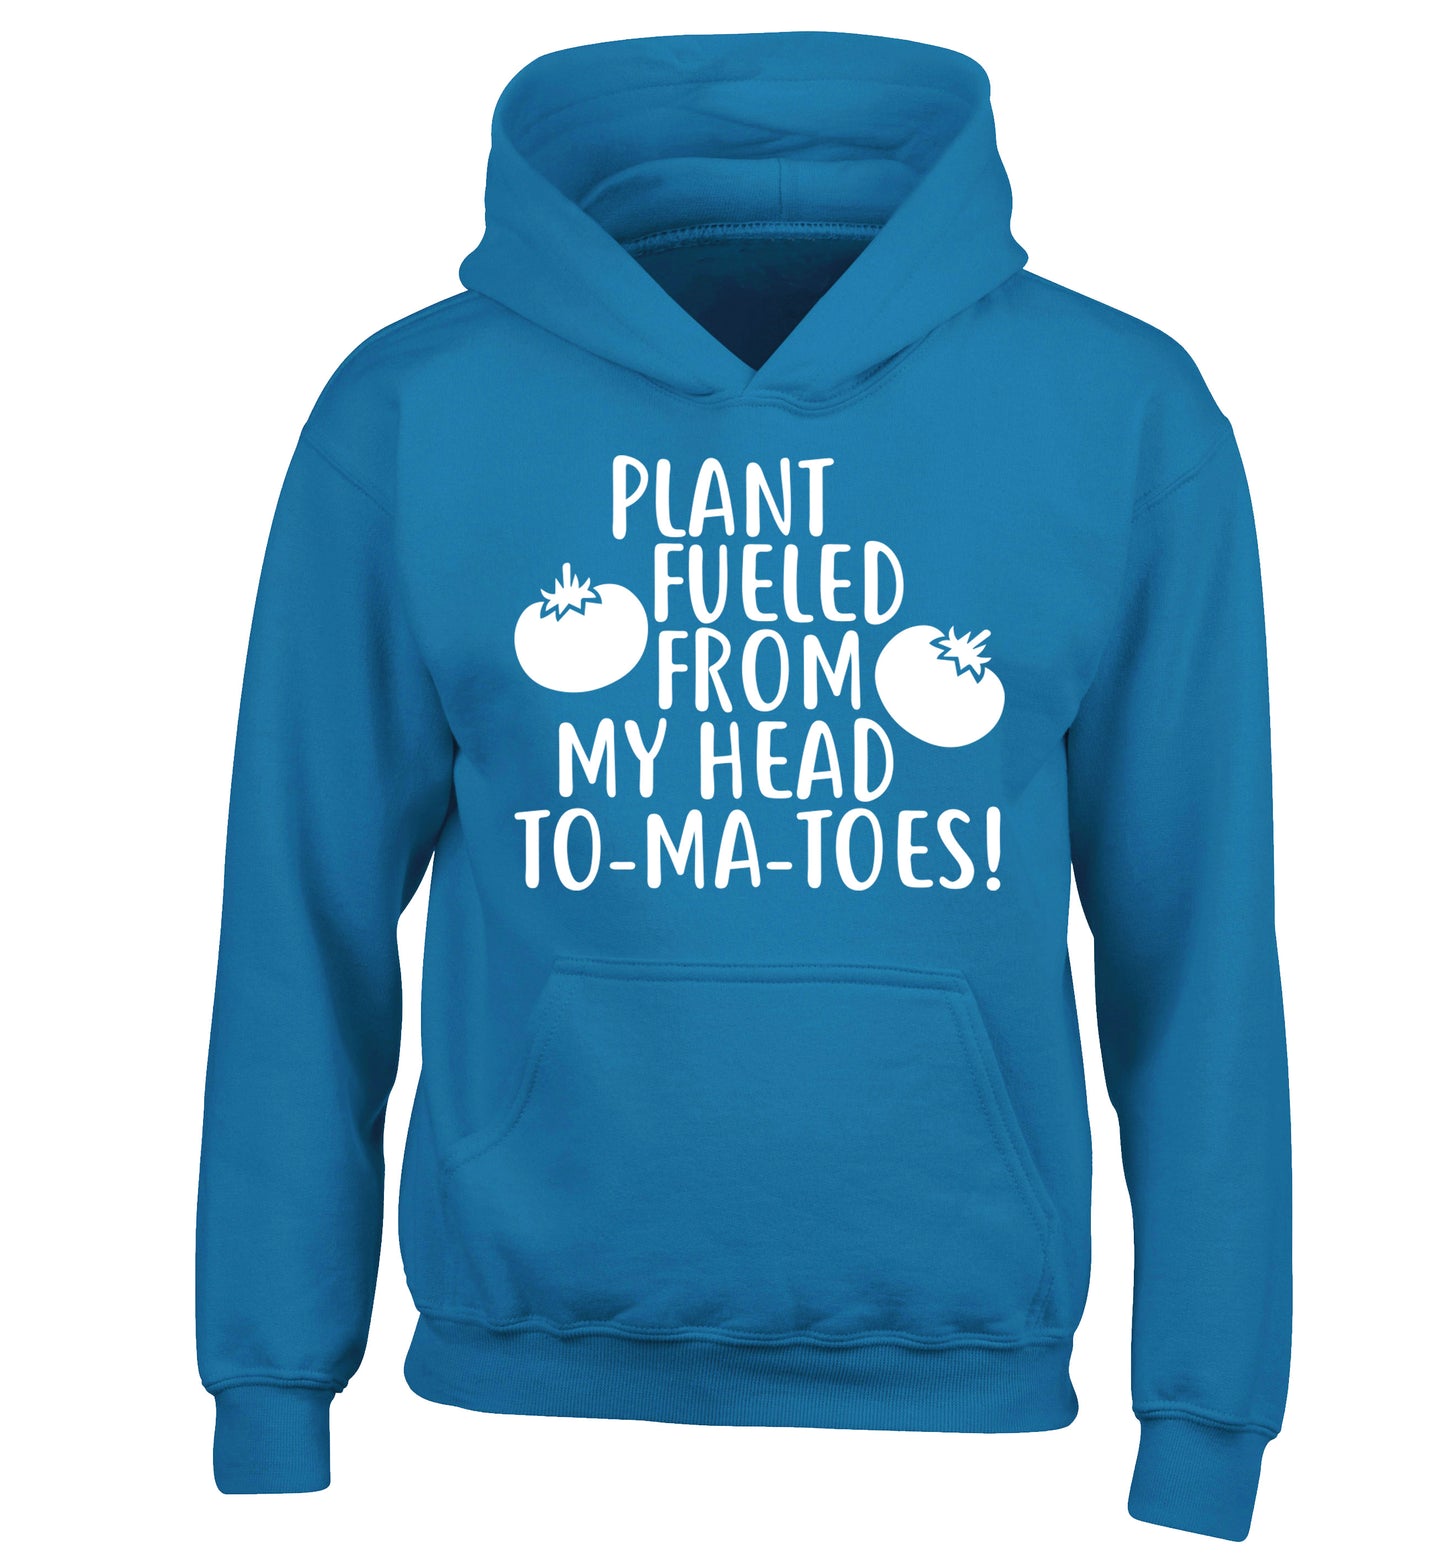 Plant fueled from my head to-ma-toes children's blue hoodie 12-14 Years